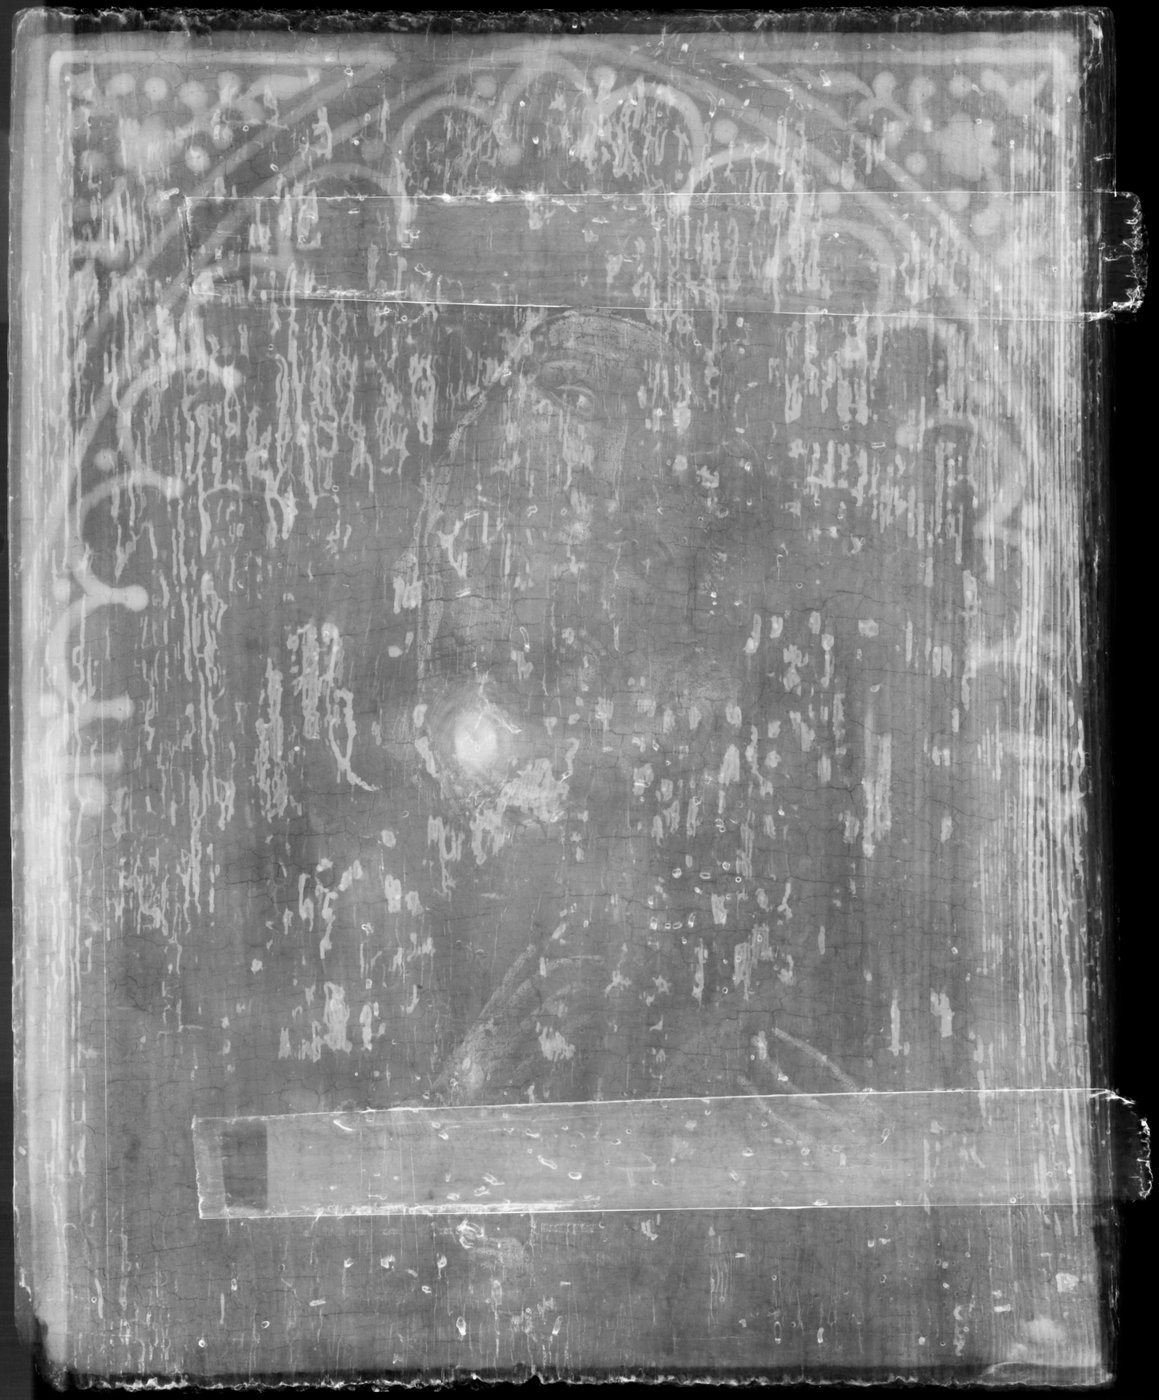 A black and white photograph of a painting of a Madonna and Child on a wooden panel. The image is an X-ray radiograph. The figures are faintly discernible. The irregular structure of the wood is clearly visible through light and dark parts.